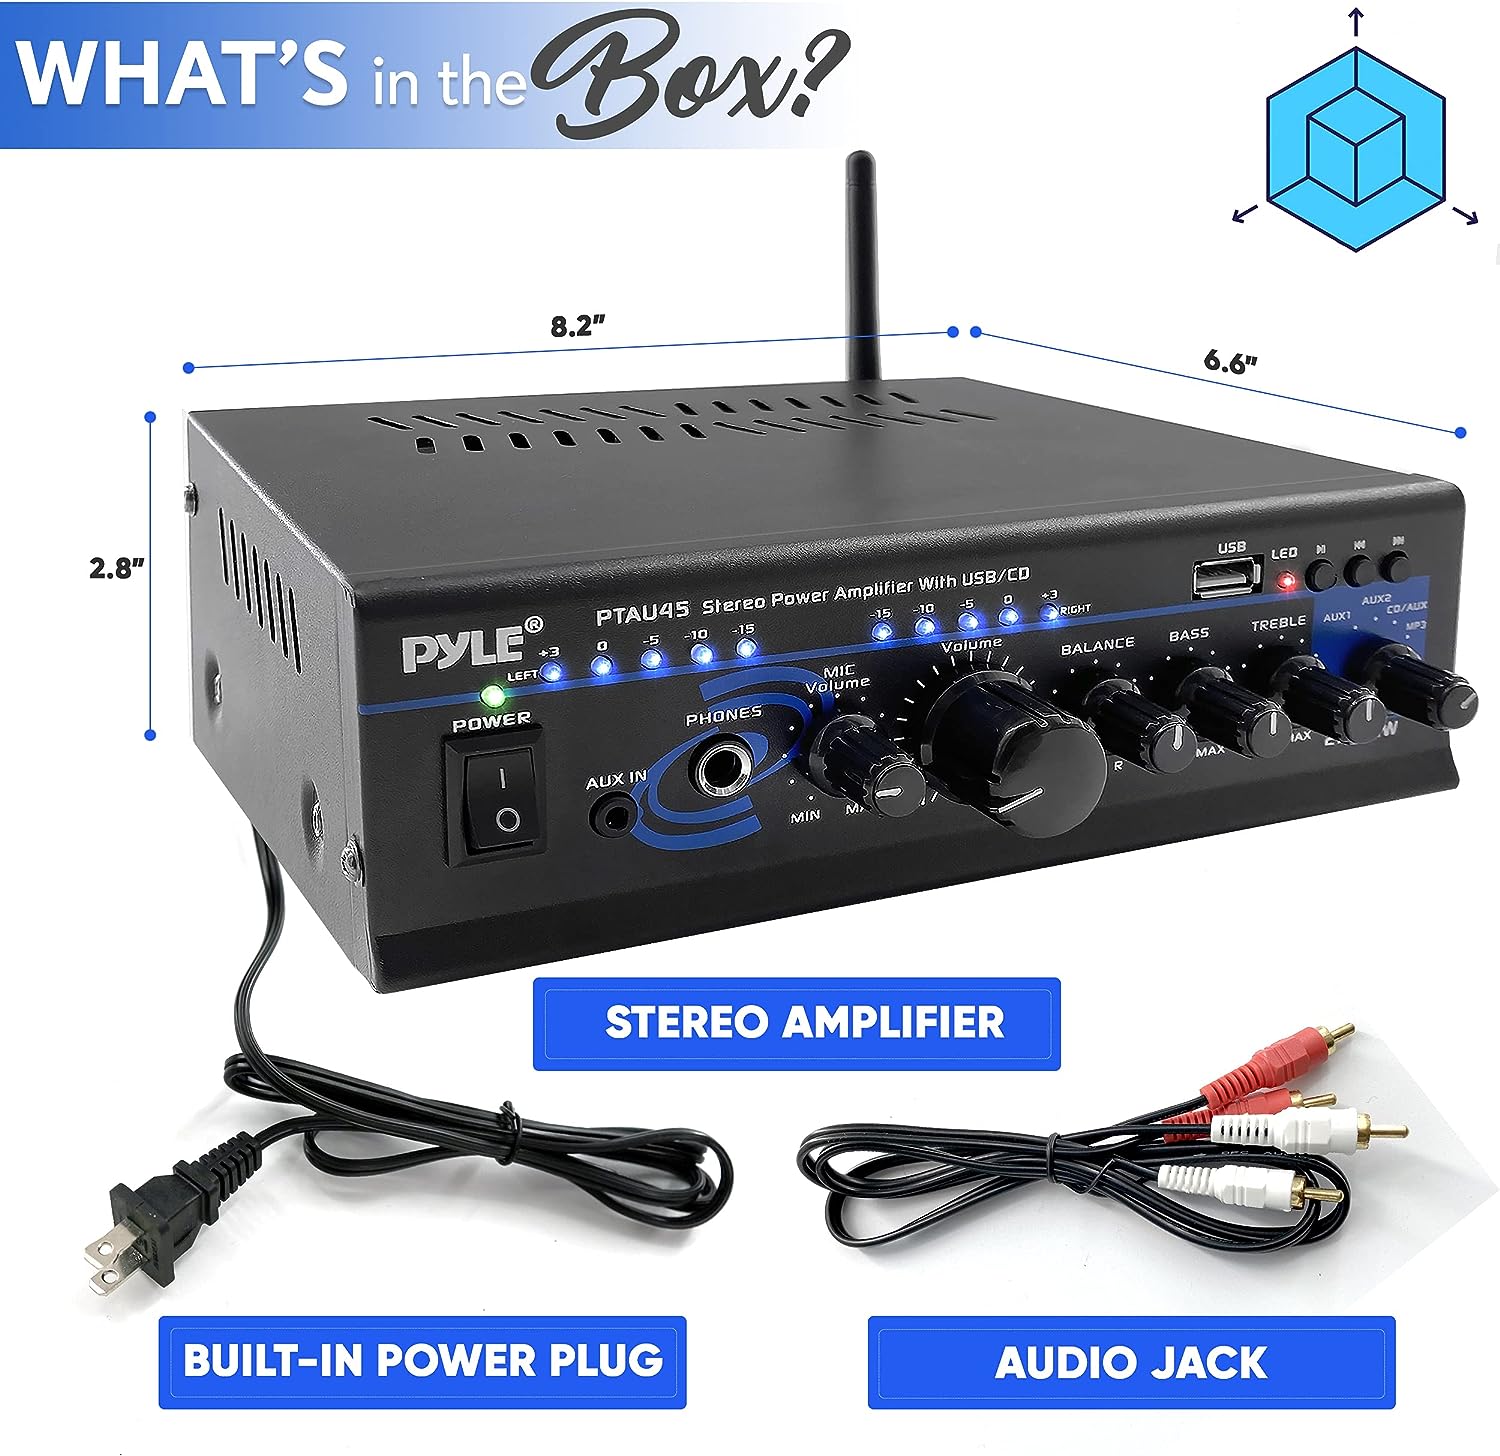 Pyle Home Bluetooth Audio Power Amplifier 2X120 Watt – Portable 2 Channel Surround Sound Stereo Receiver w/ USB – Amplified Subwoofer Speaker, CD DVD, MP3, iPhone, Phone, Theater, PA System -PTAU45.5 Review